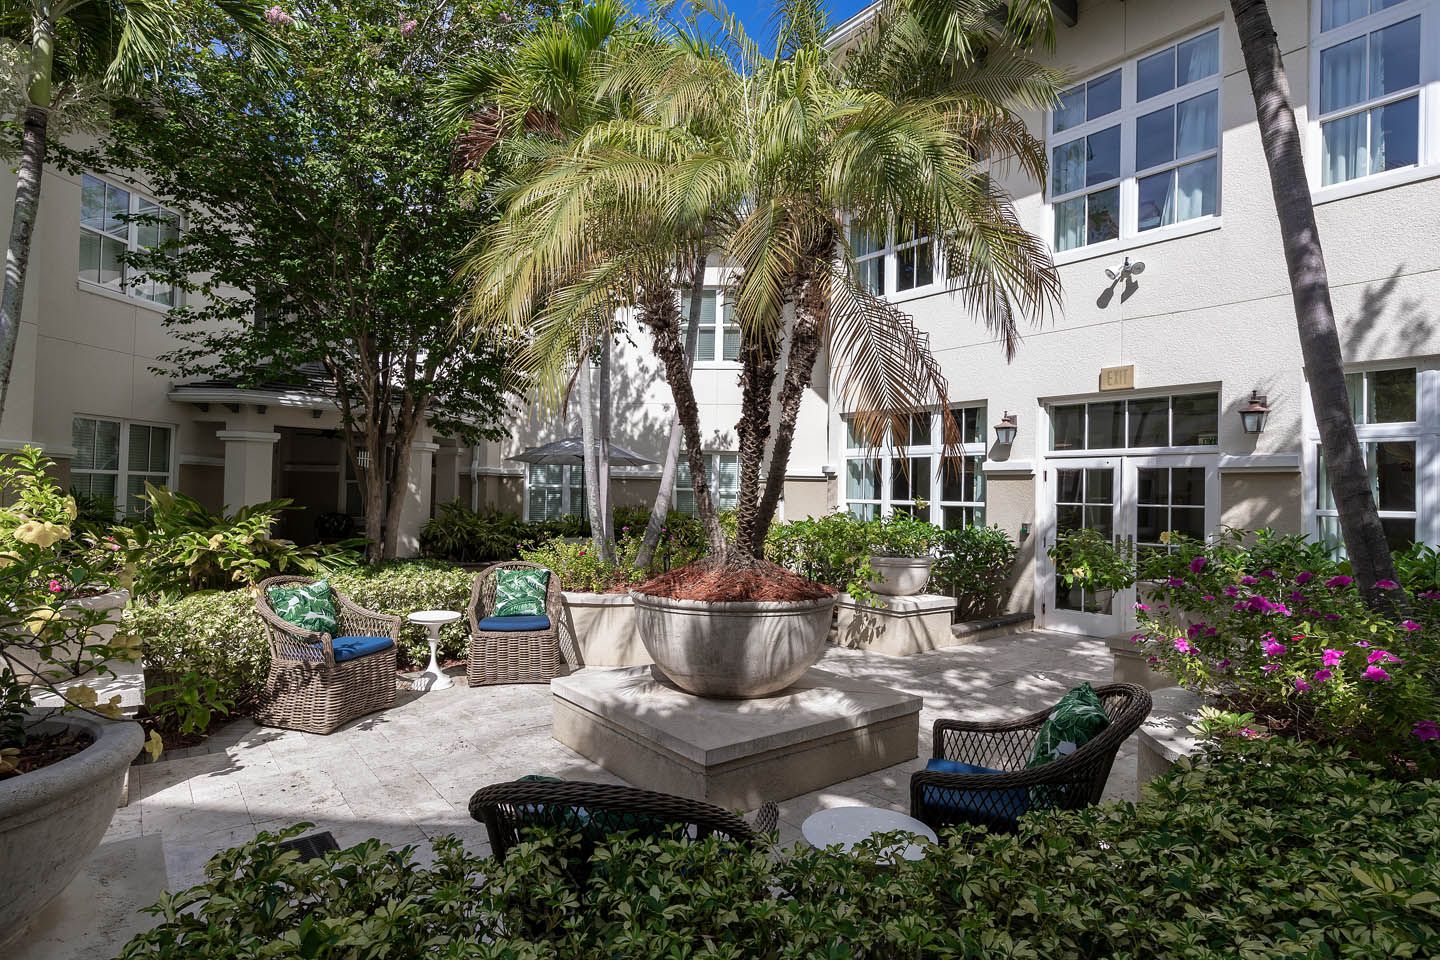 Senior living community, The Estate At Hyde Park, featuring lush gardens, urban architecture, and patio furniture.